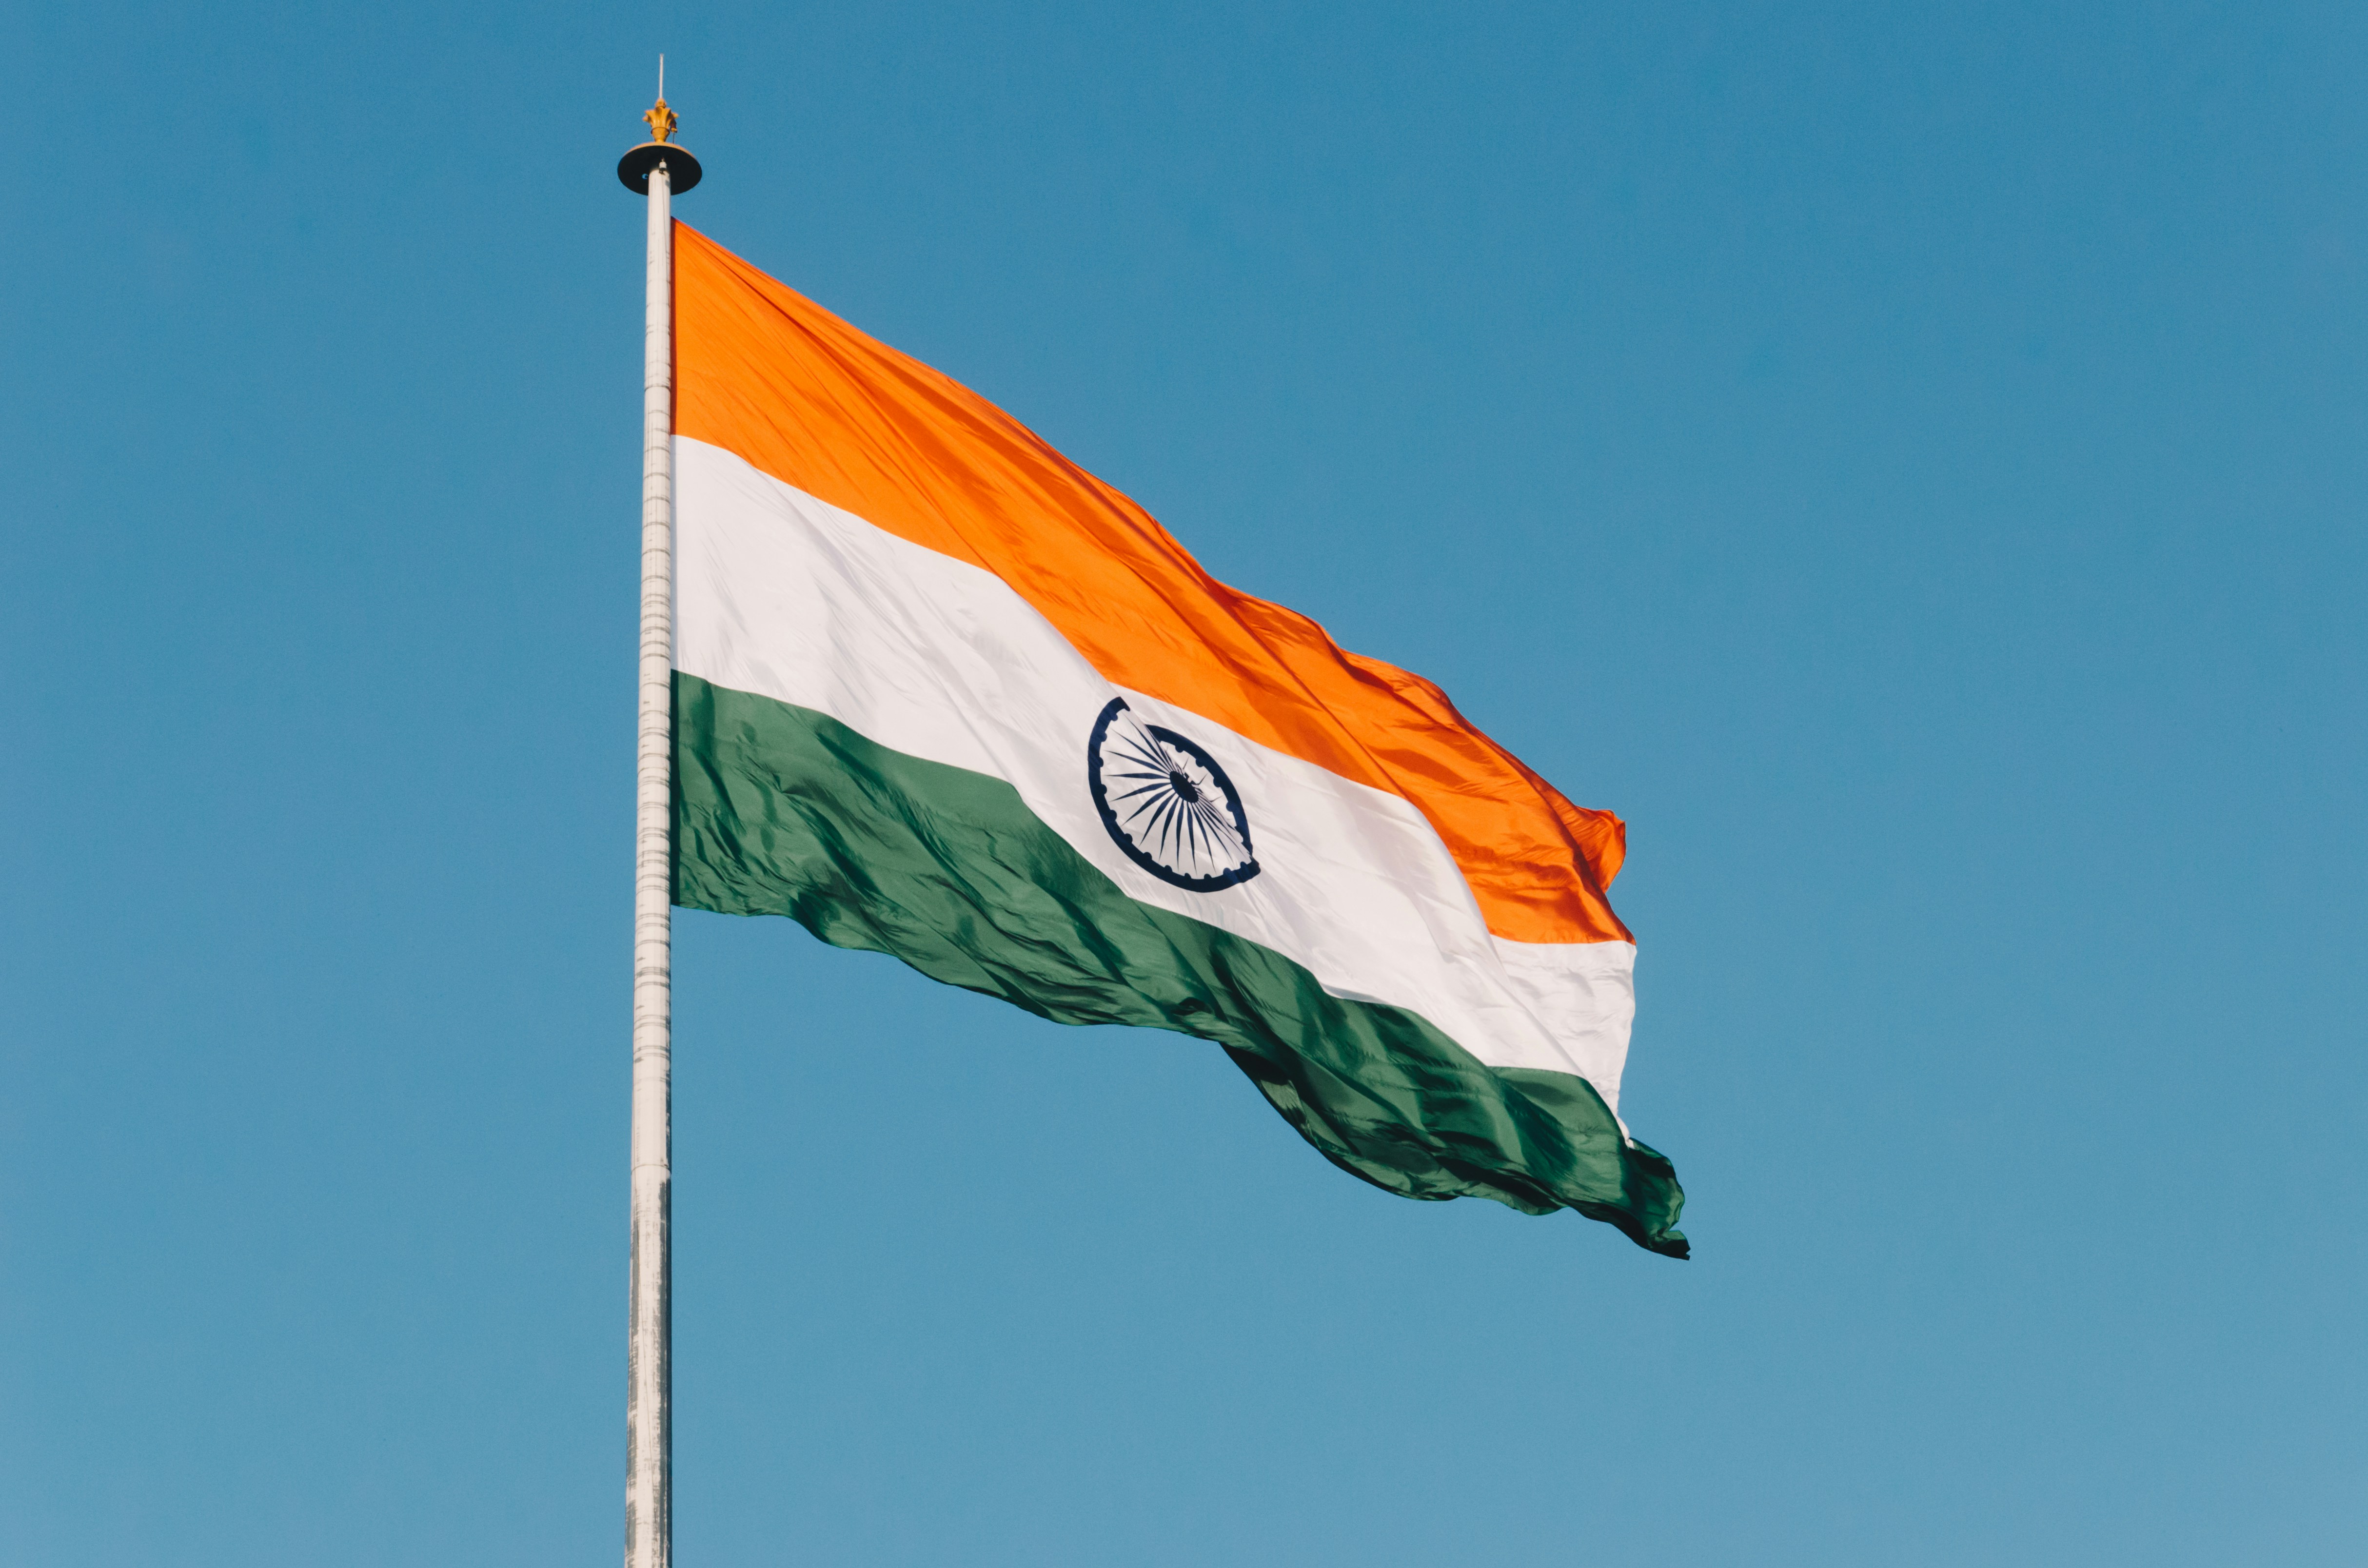 Image shows the Indian flag, comprised of 3 colored stripes of orange, white and green from top to bottom with an emblem at the center of the middle white stripe, flying high with the sky as the background.